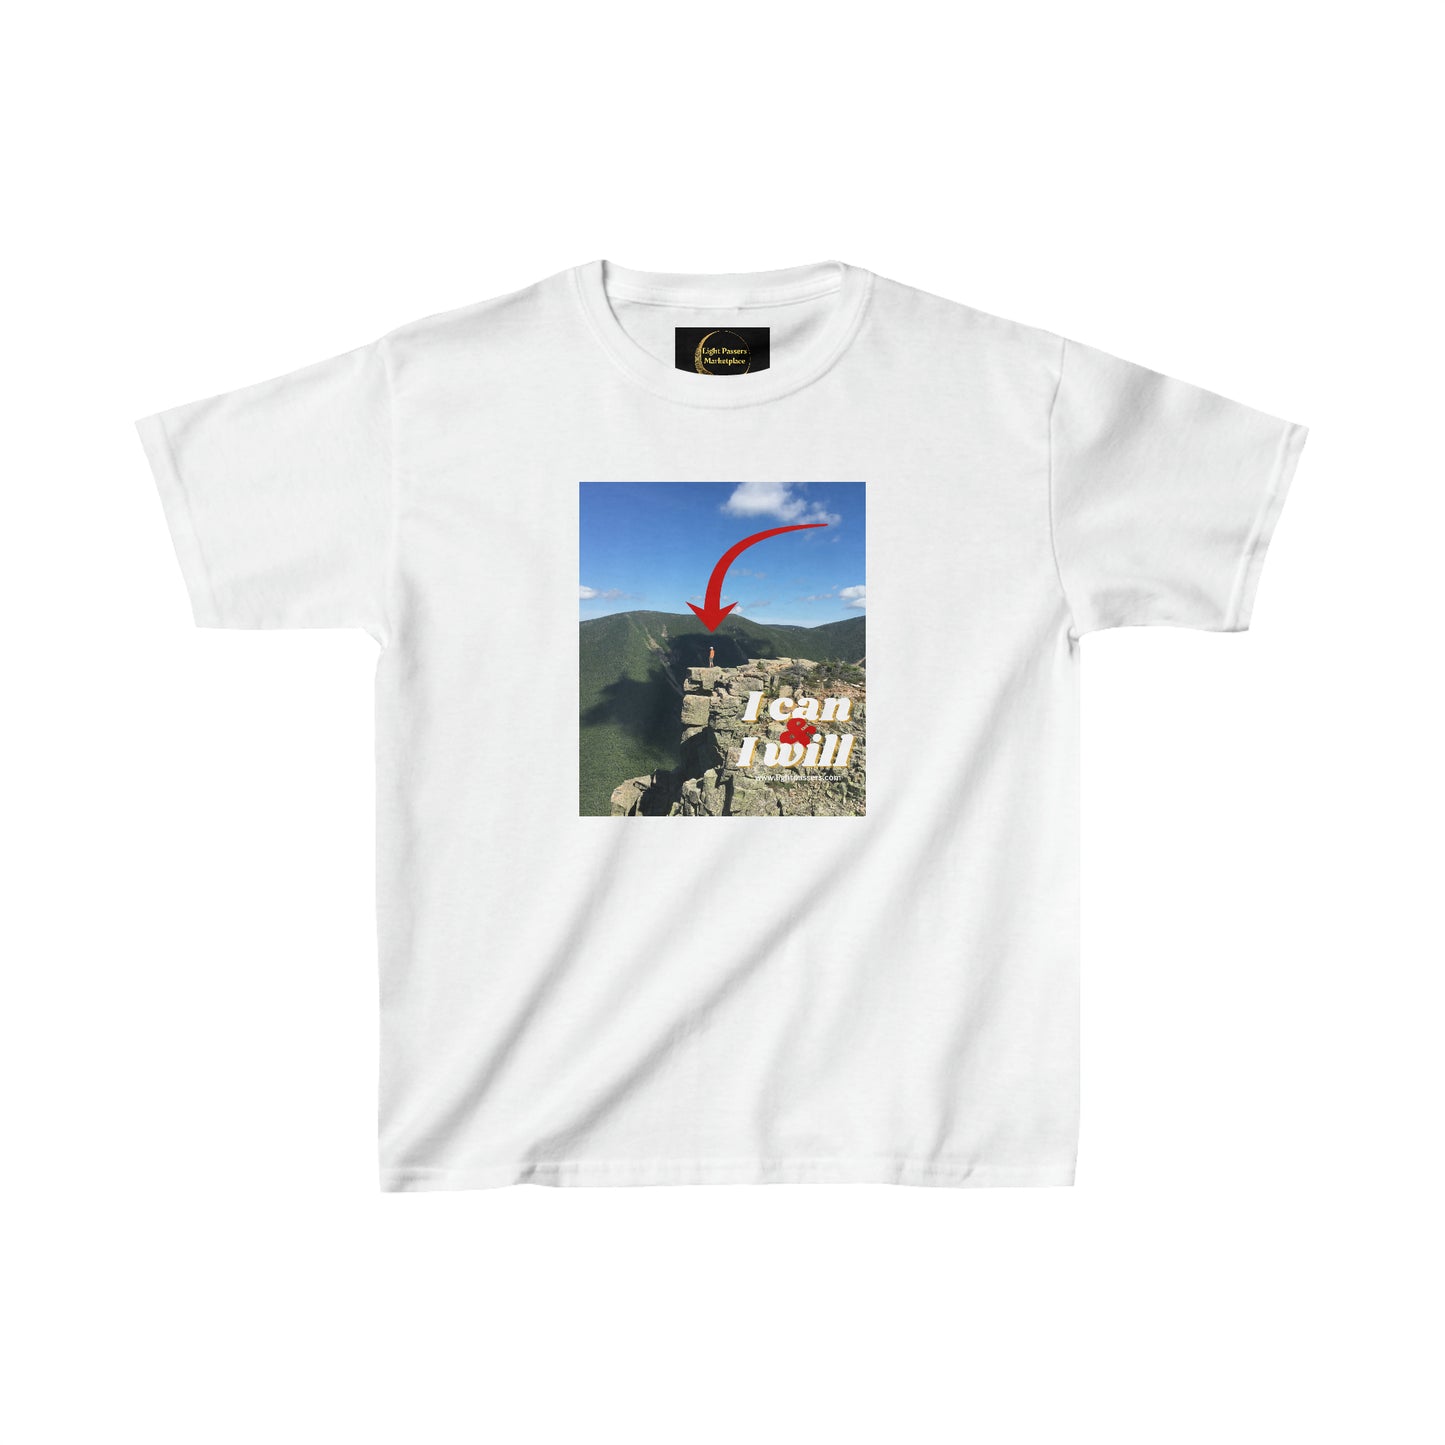 A white youth t-shirt featuring a mountain print and a red arrow. Made of 100% cotton with twill tape shoulders for durability and ribbed collar for curl resistance. Ethically sourced US cotton.